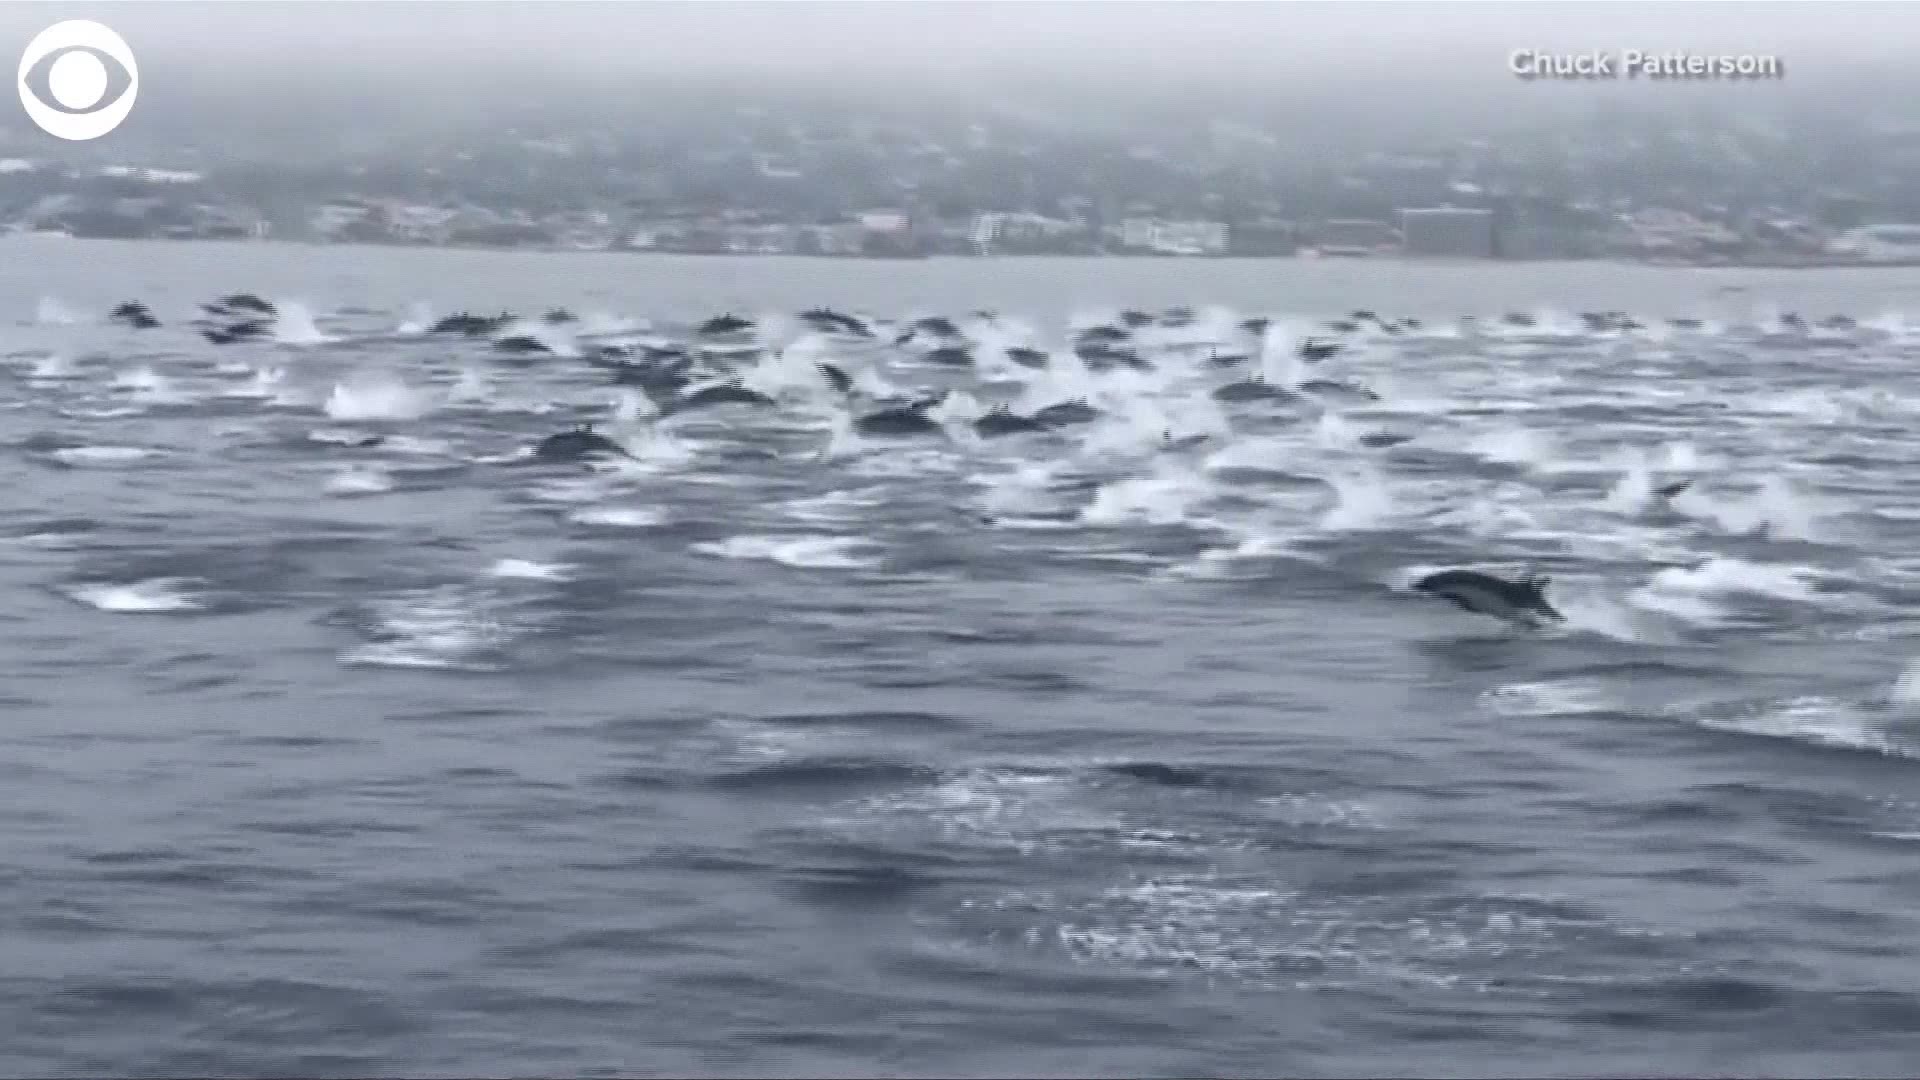 A pod of dolphins was spotted off the coast of Laguna Beach, California keeping up with a boat. About 100 dolphins hung out for about 25 minutes.